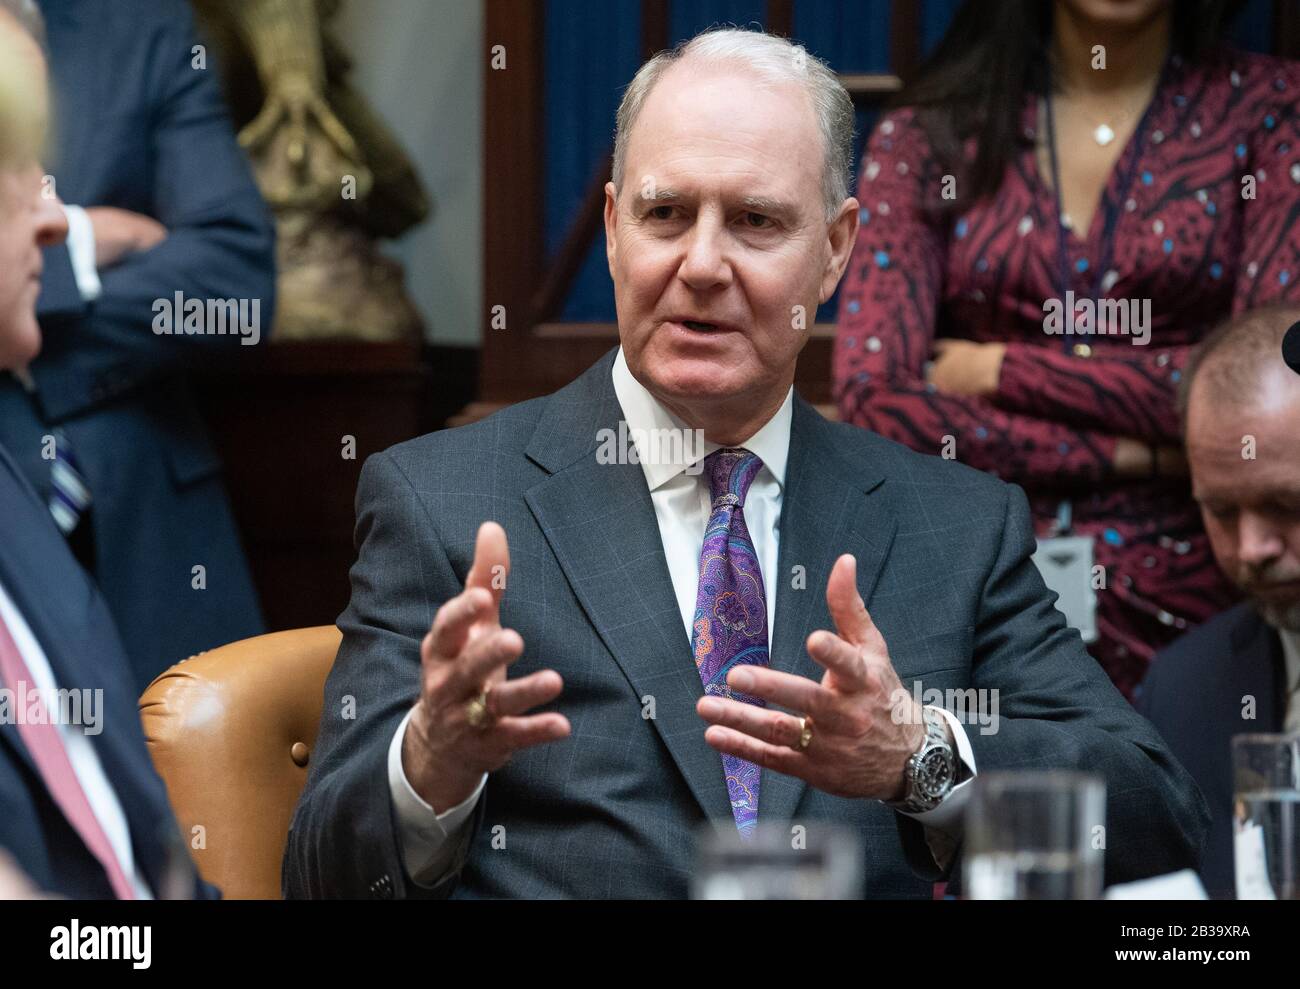 Washington, United States. 04th Mar, 2020. Southwest CEO Gary Kelly addresses President Donald Trump during a meeting of airline CEOs and their response to the Coronavirus outbreak, at the White House in Washington, DC Wednesday, March 4, 2020. There are now 130 known coronavirus cases throughout 13 states, with a U.S. death toll of nine. Photo by Kevin Dietsch/UPI Credit: UPI/Alamy Live News Stock Photo